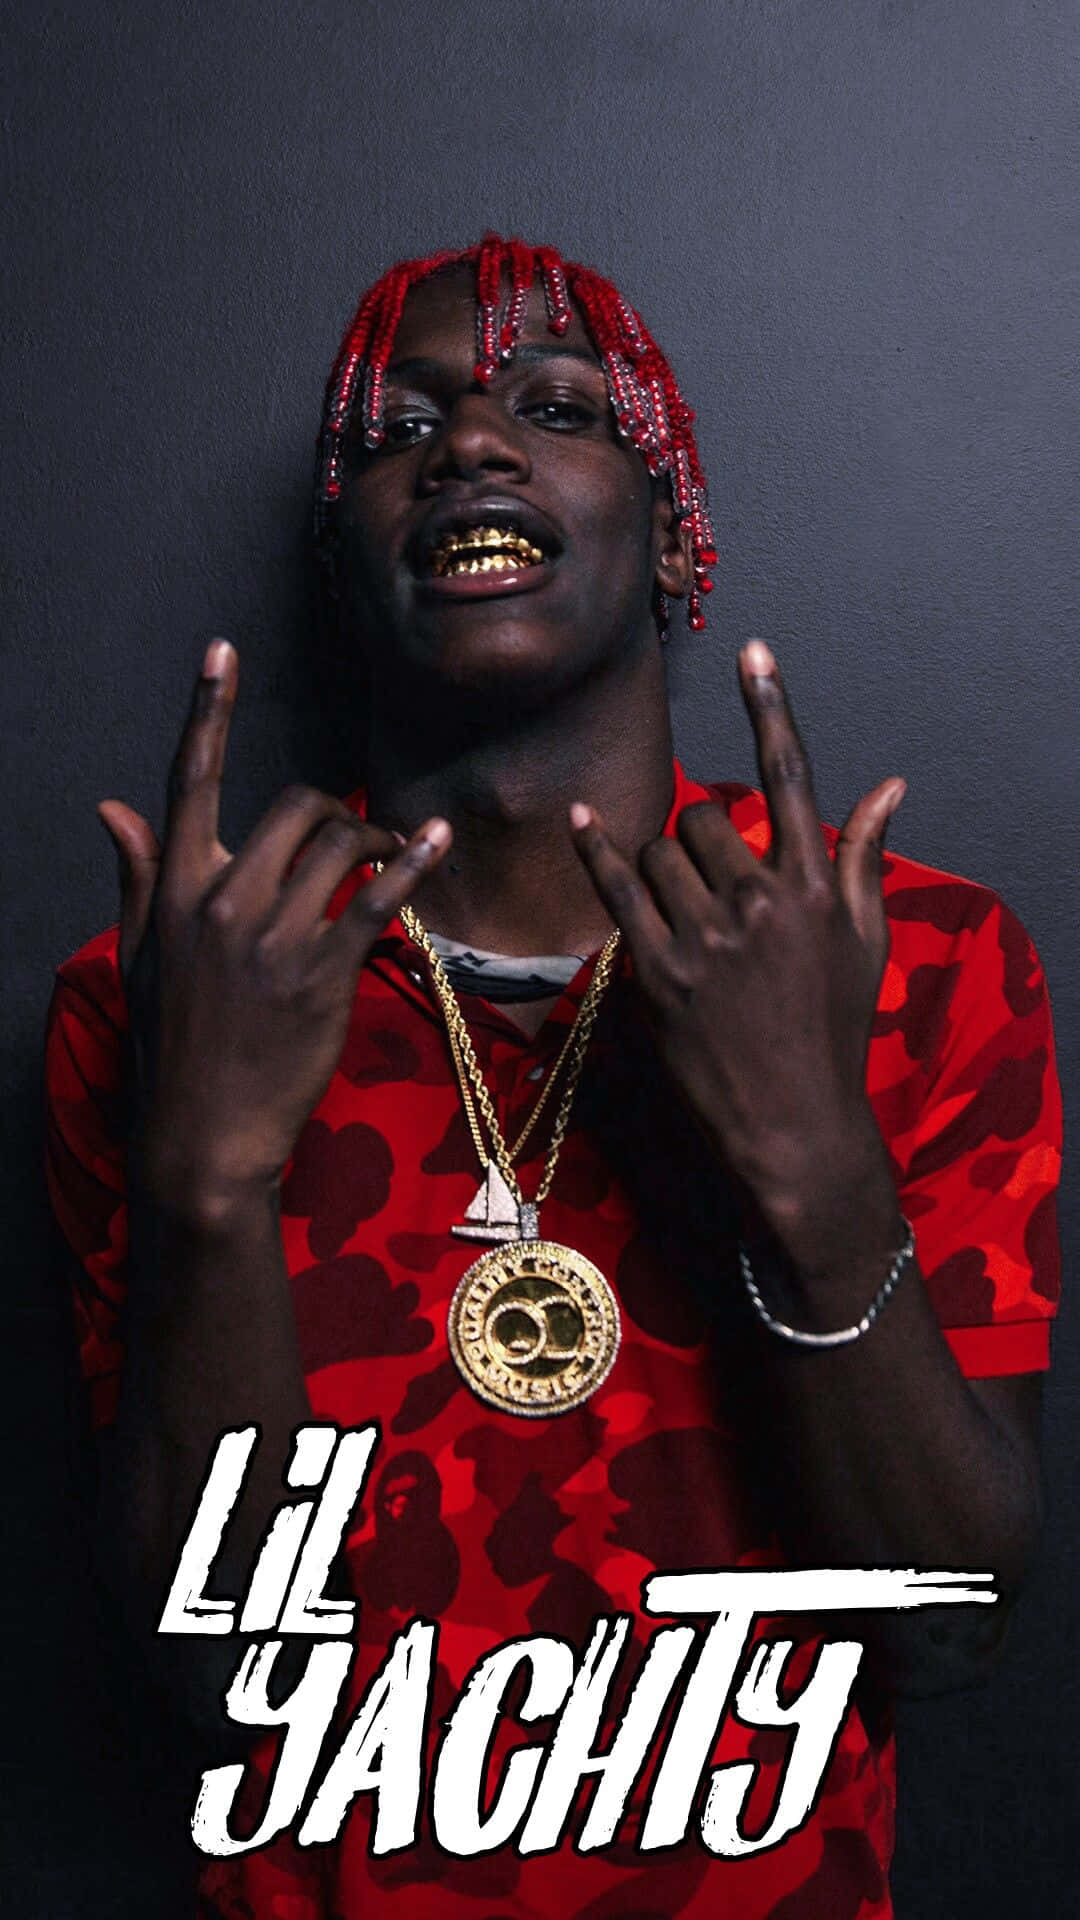 Lil boat album cover by Lil Yachty 1920x1080  rwallpaper